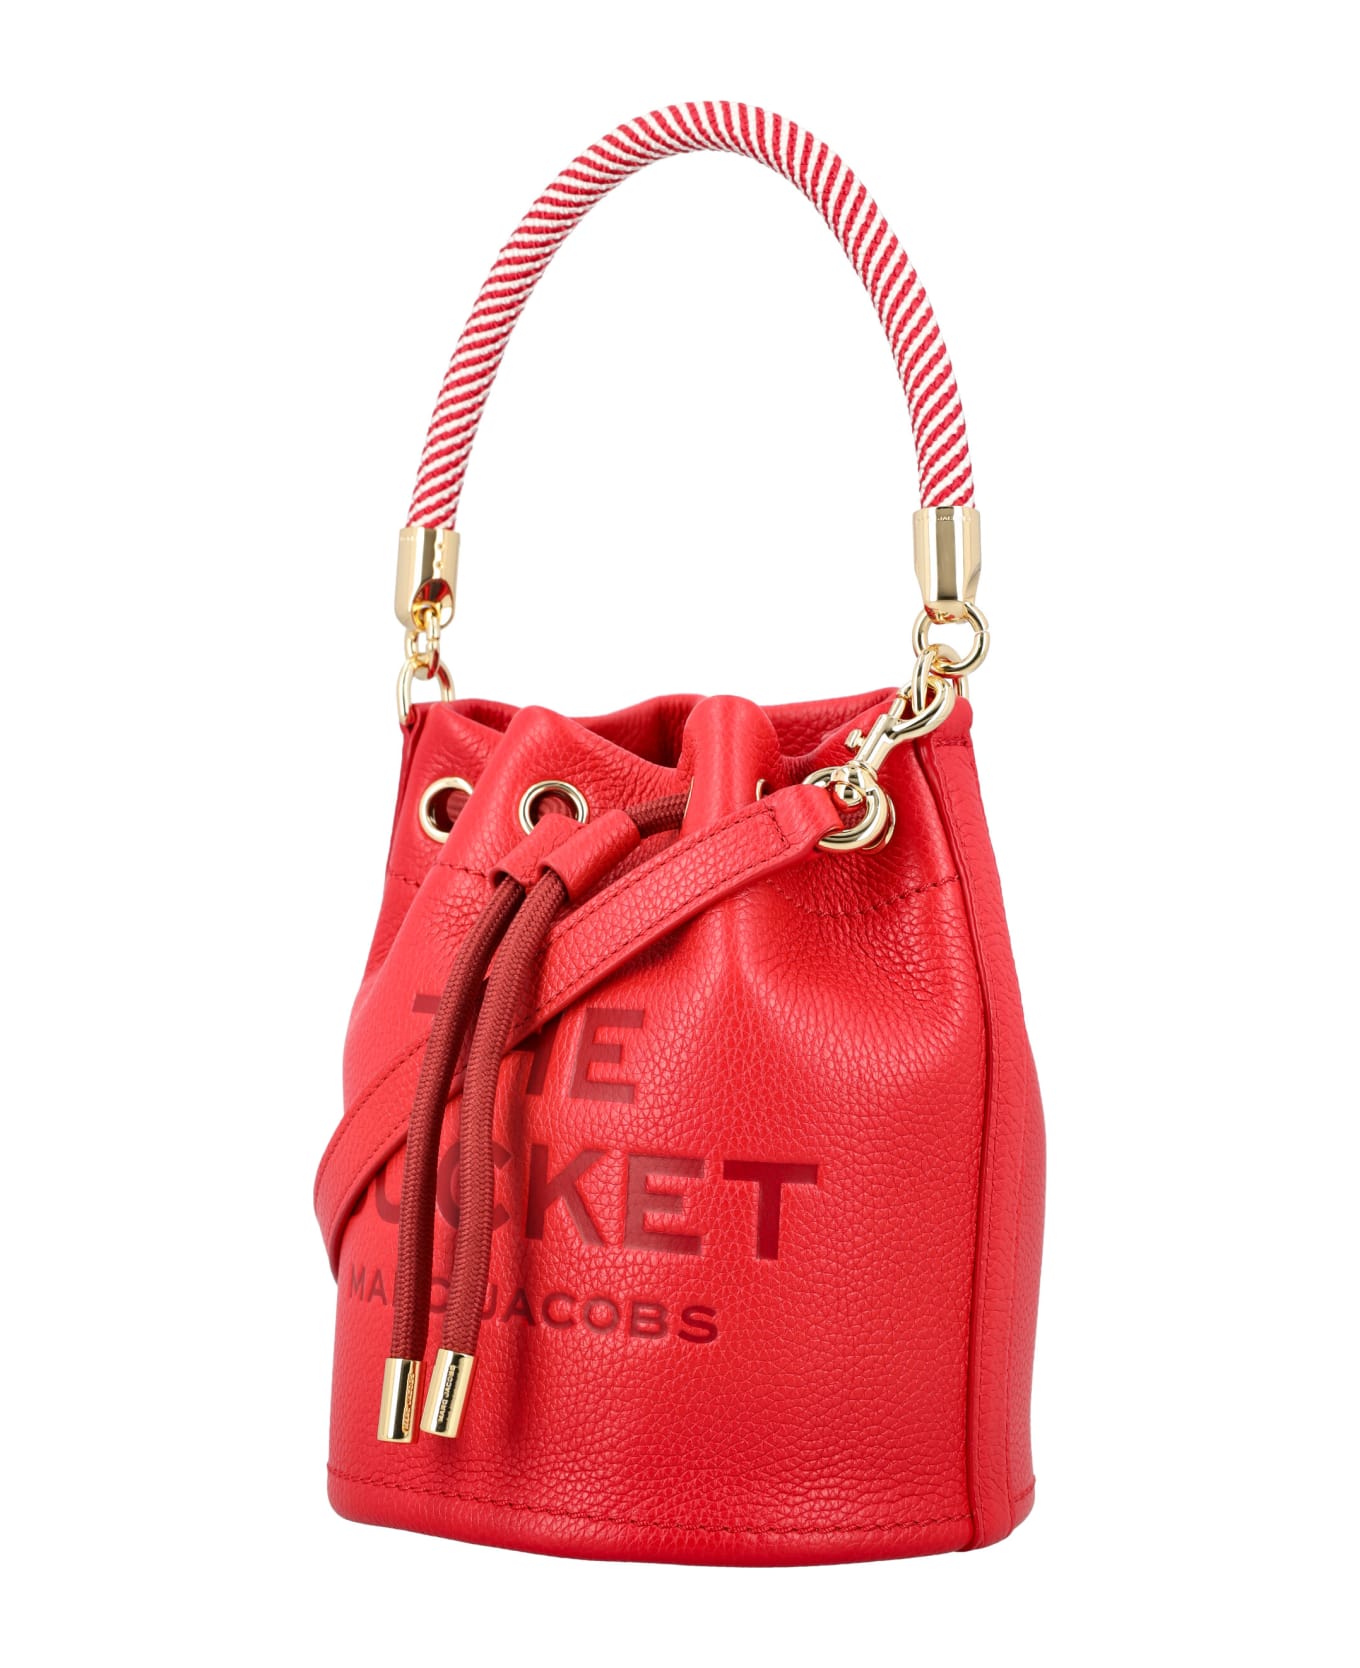 Marc Jacobs The Bucket Bag - TRUE RED トートバッグ